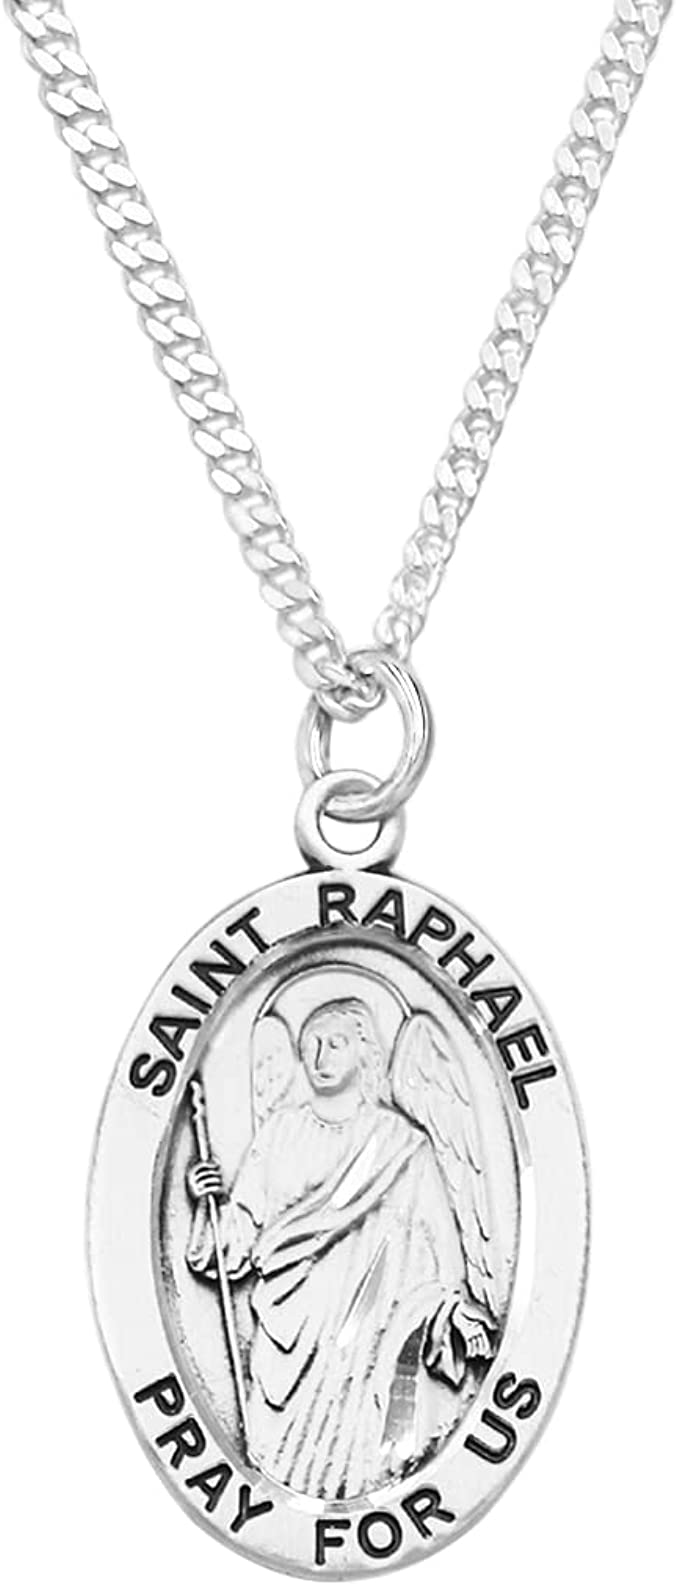 Sterling Silver Medal Pendant And Curb Chain Necklace, 24" (Saint Raphael)